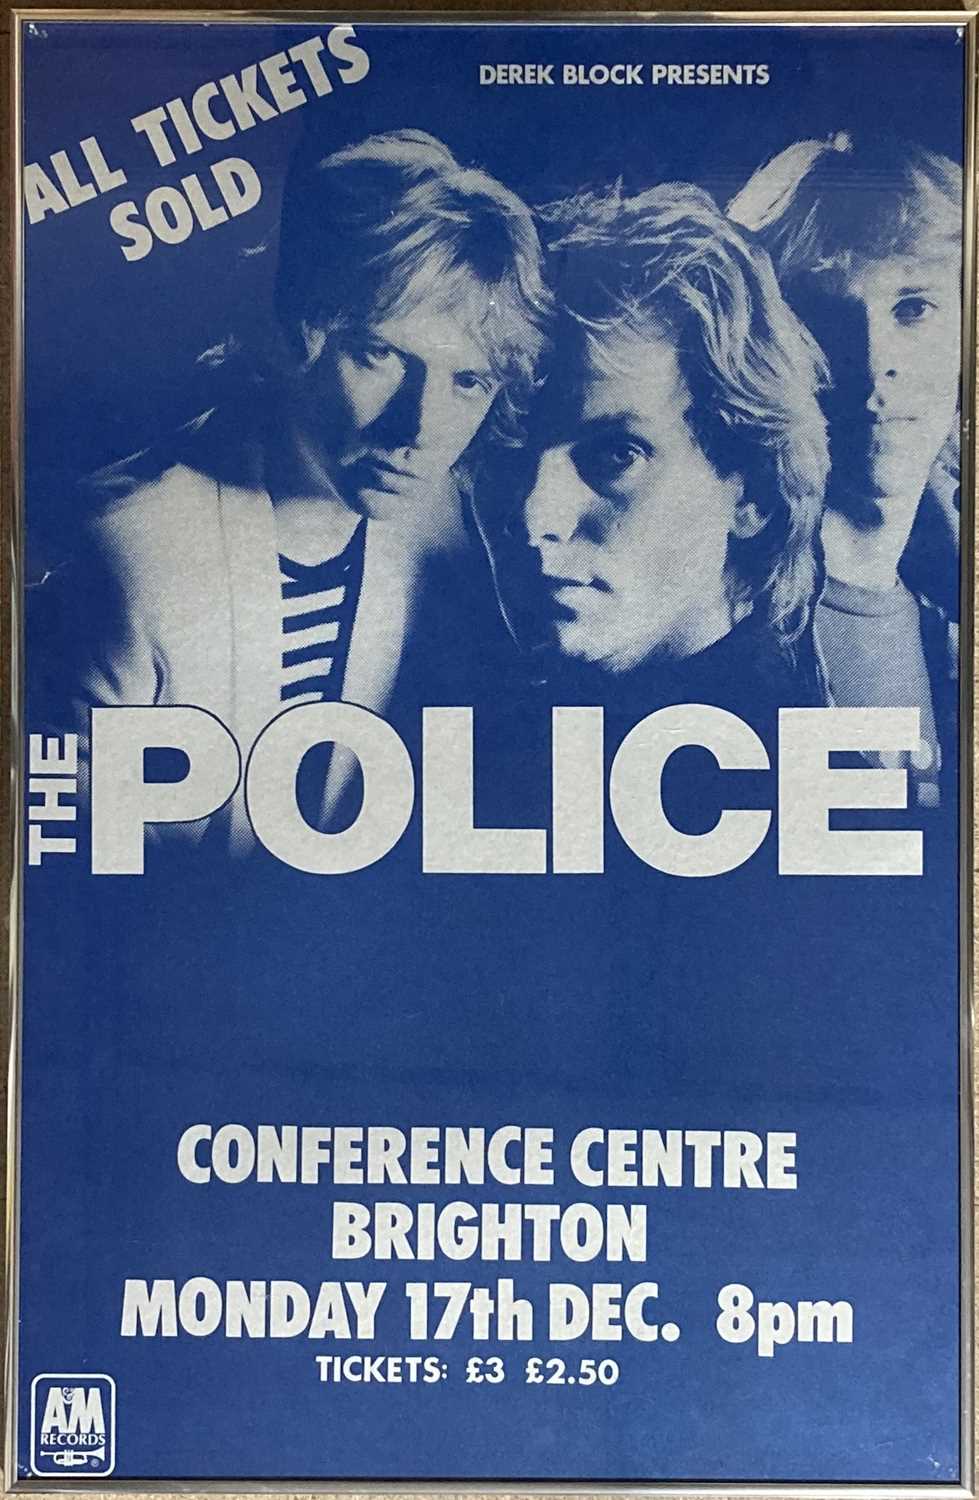 Lot 322 - THE POLICE 1979 CONCERT POSTER.